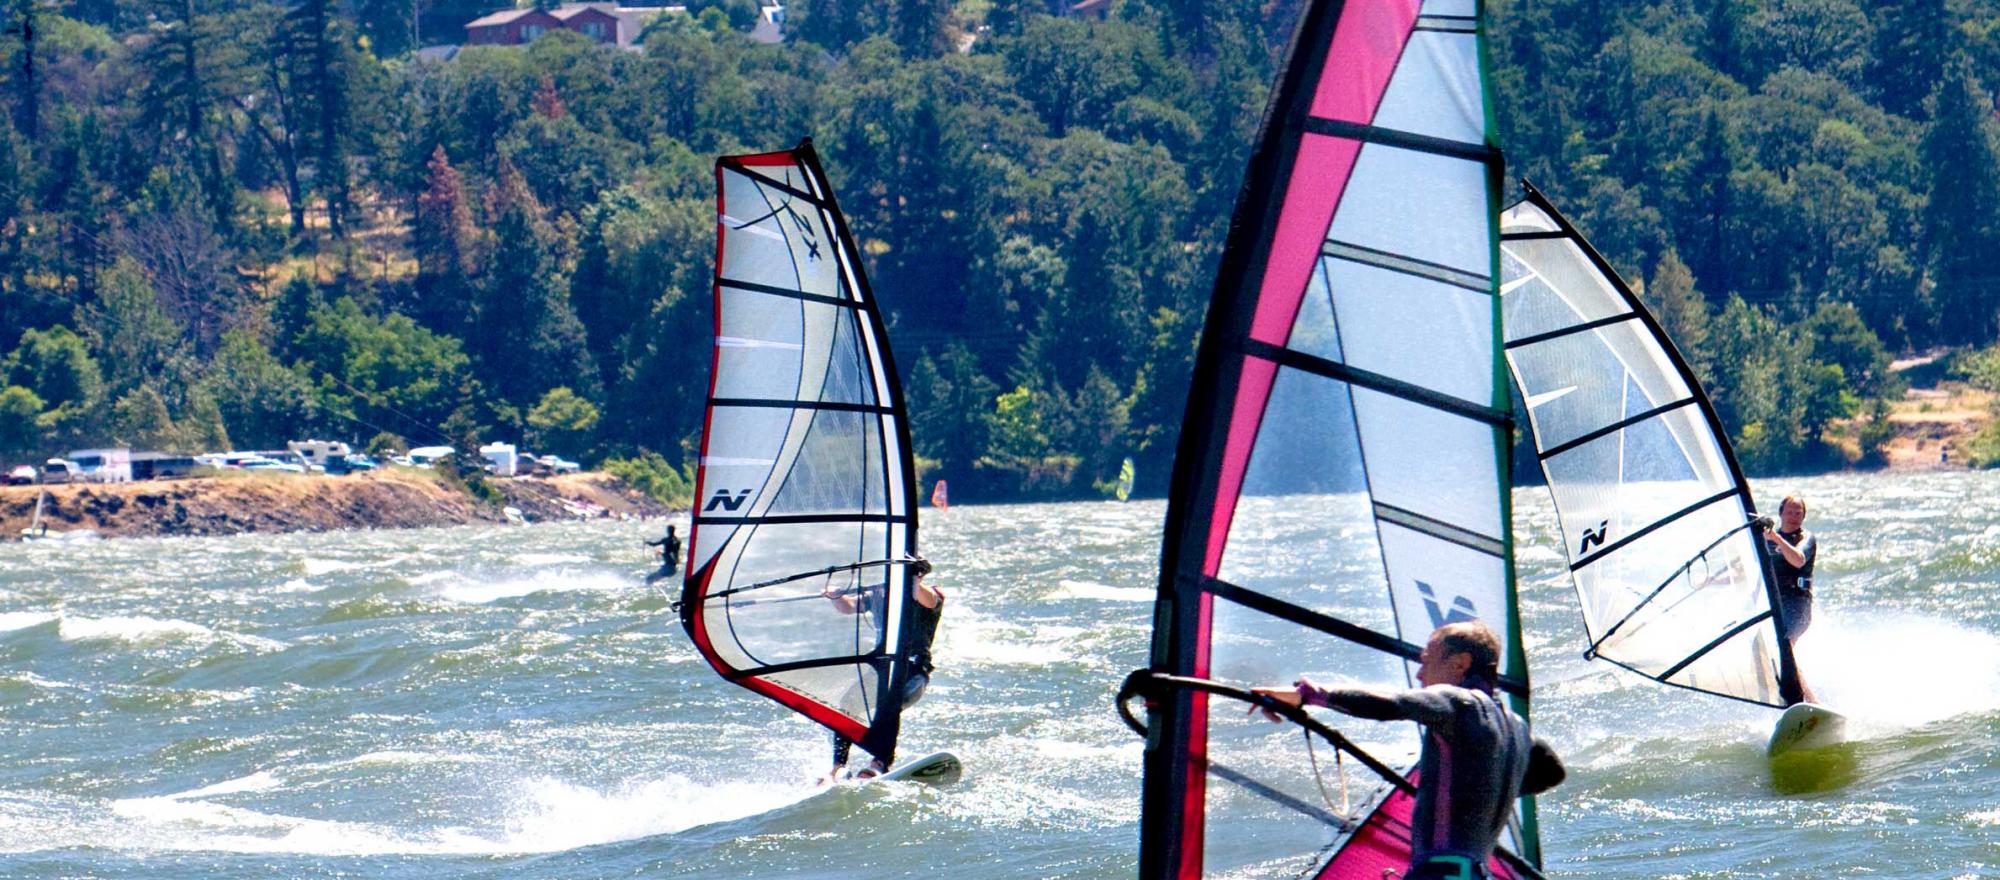 Windsurfers on the Columbia River Gorge.